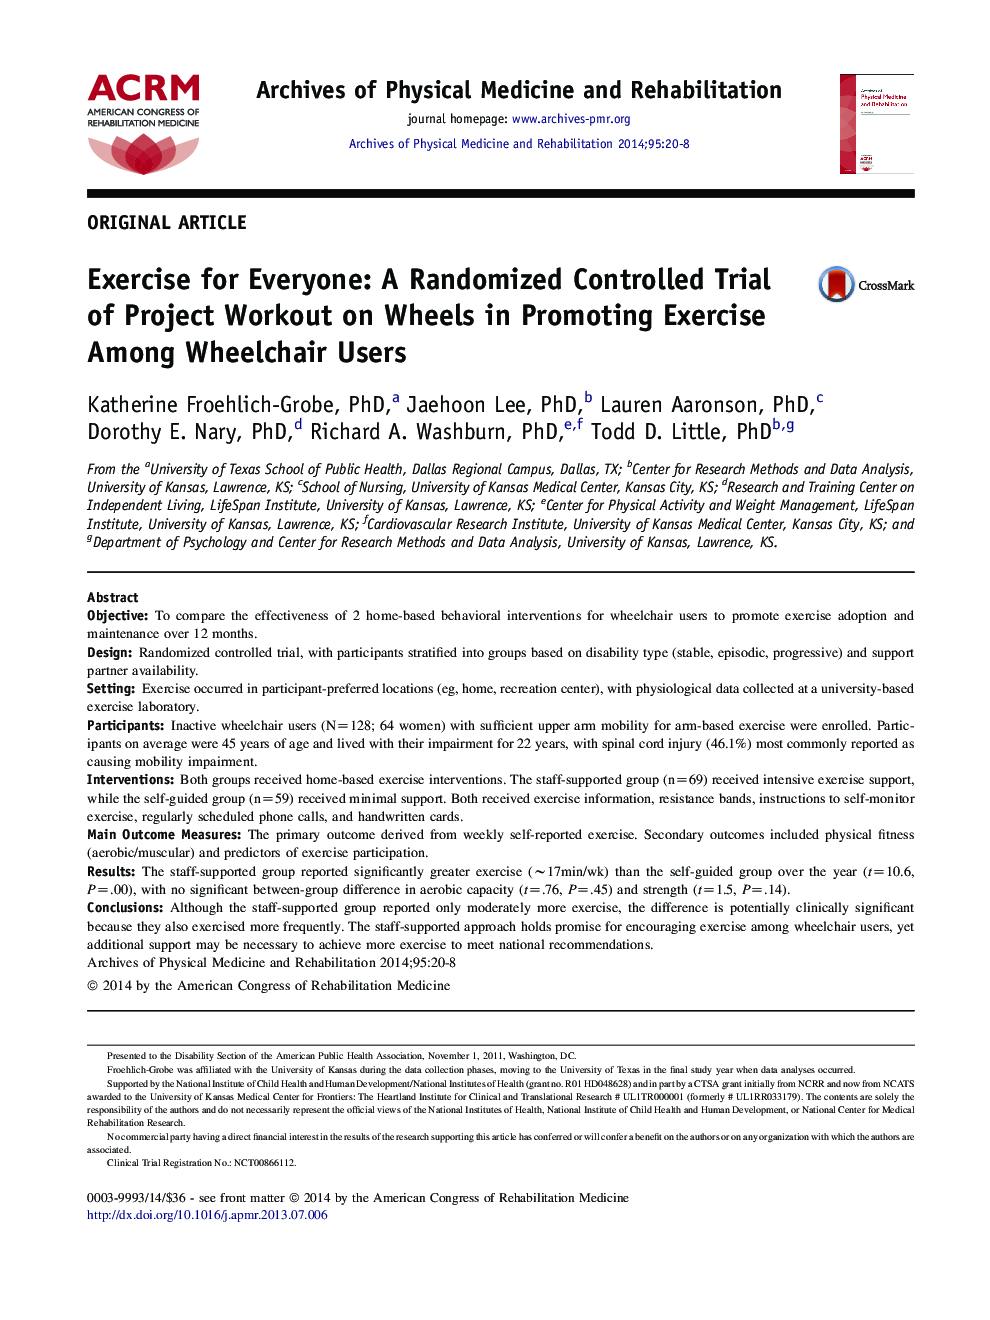 Exercise for Everyone: A Randomized Controlled Trial of Project Workout on Wheels in Promoting Exercise Among Wheelchair Users 